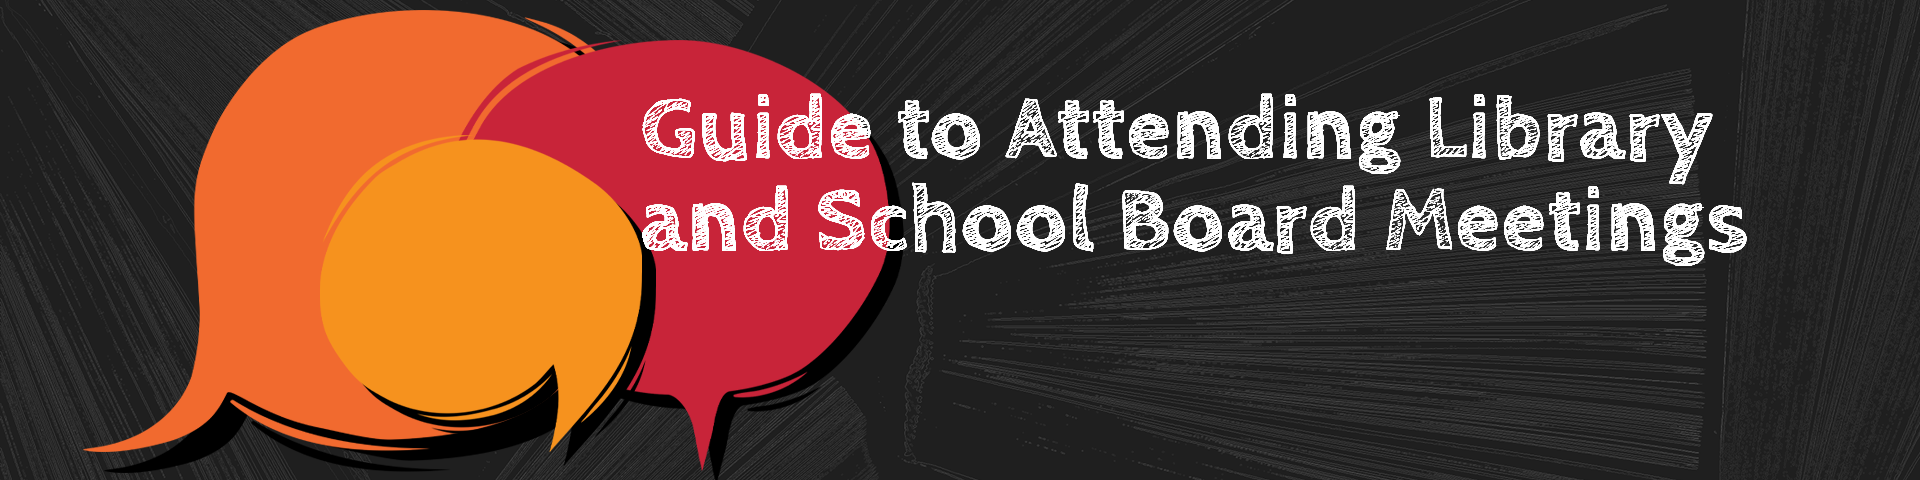 Guide to Attending Library and School Board Meetings